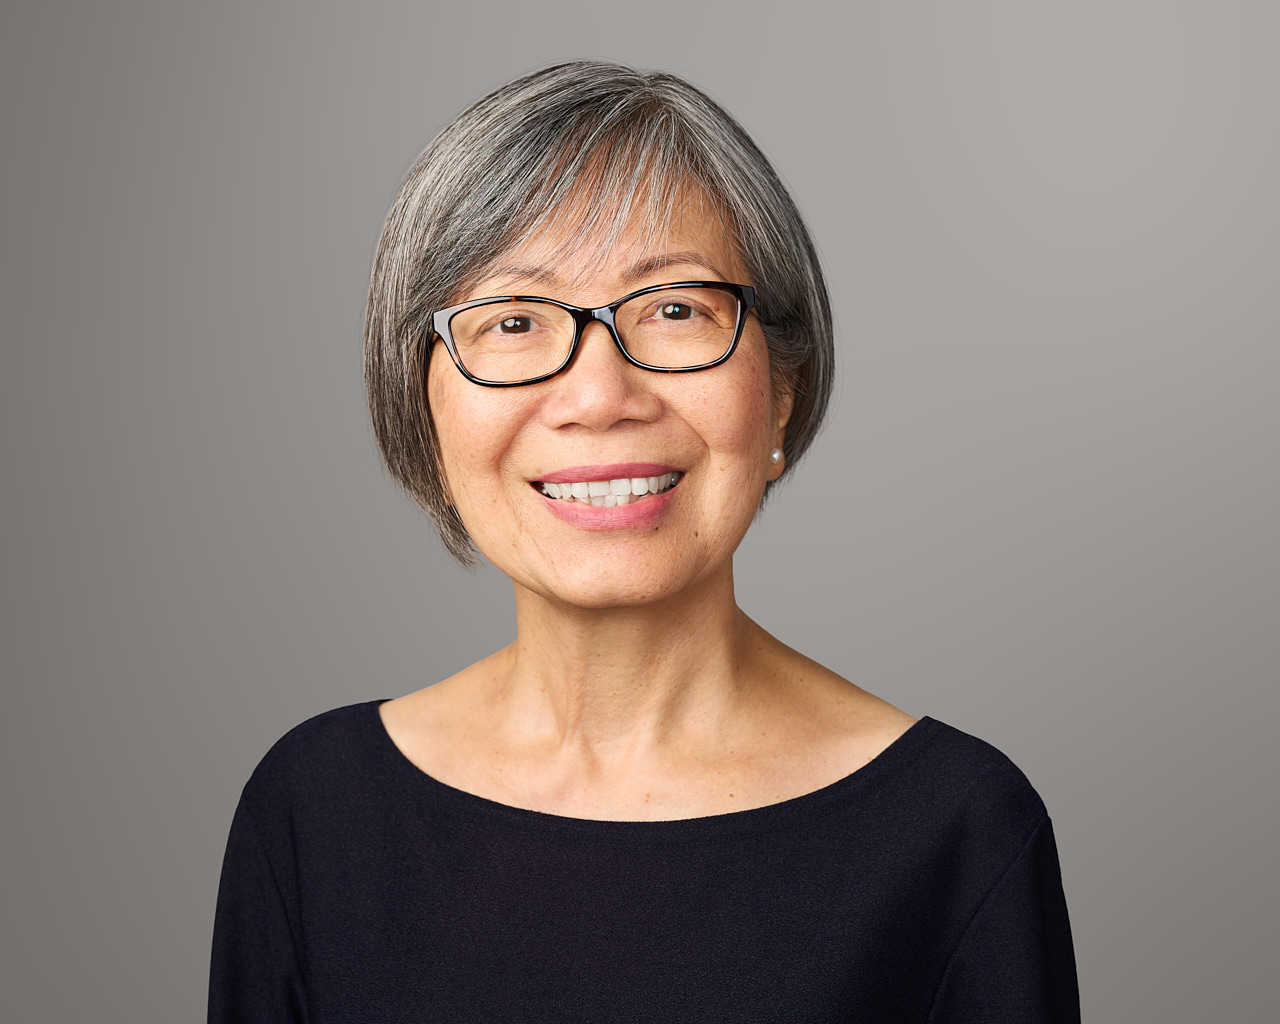 Professional business headshot of a woman wearing glasses with a great smile.